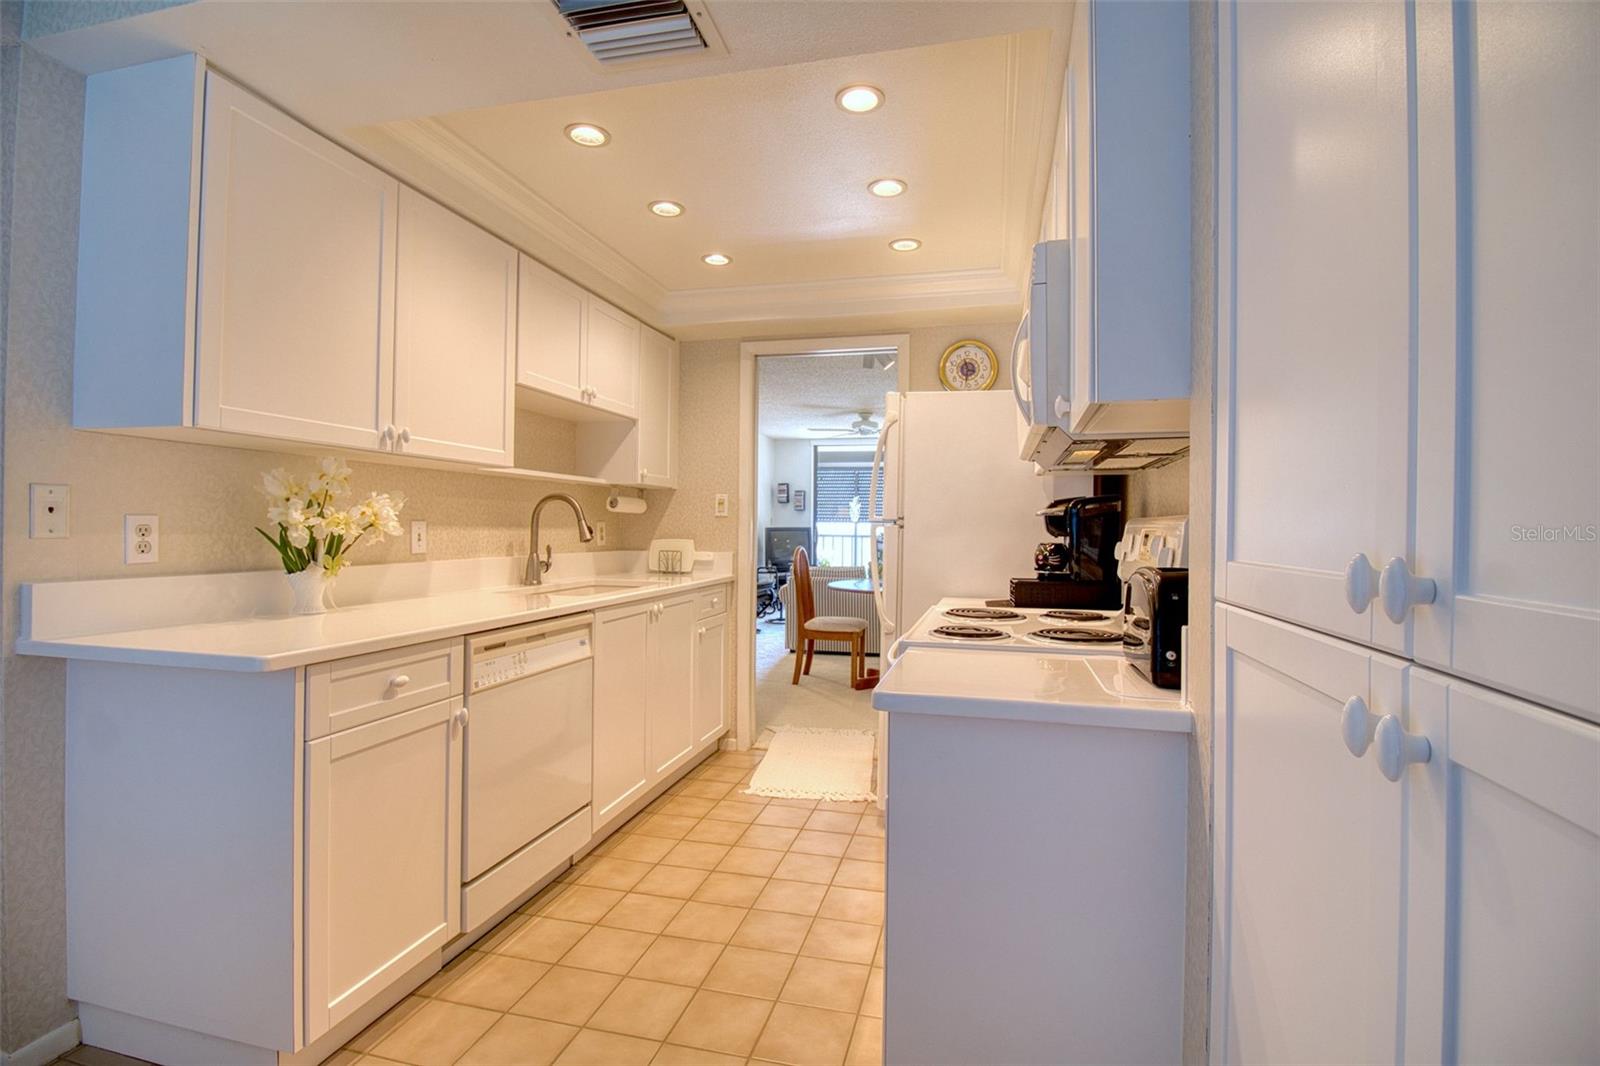 Bright white kitchen with recessed lighting in cove ceiling.